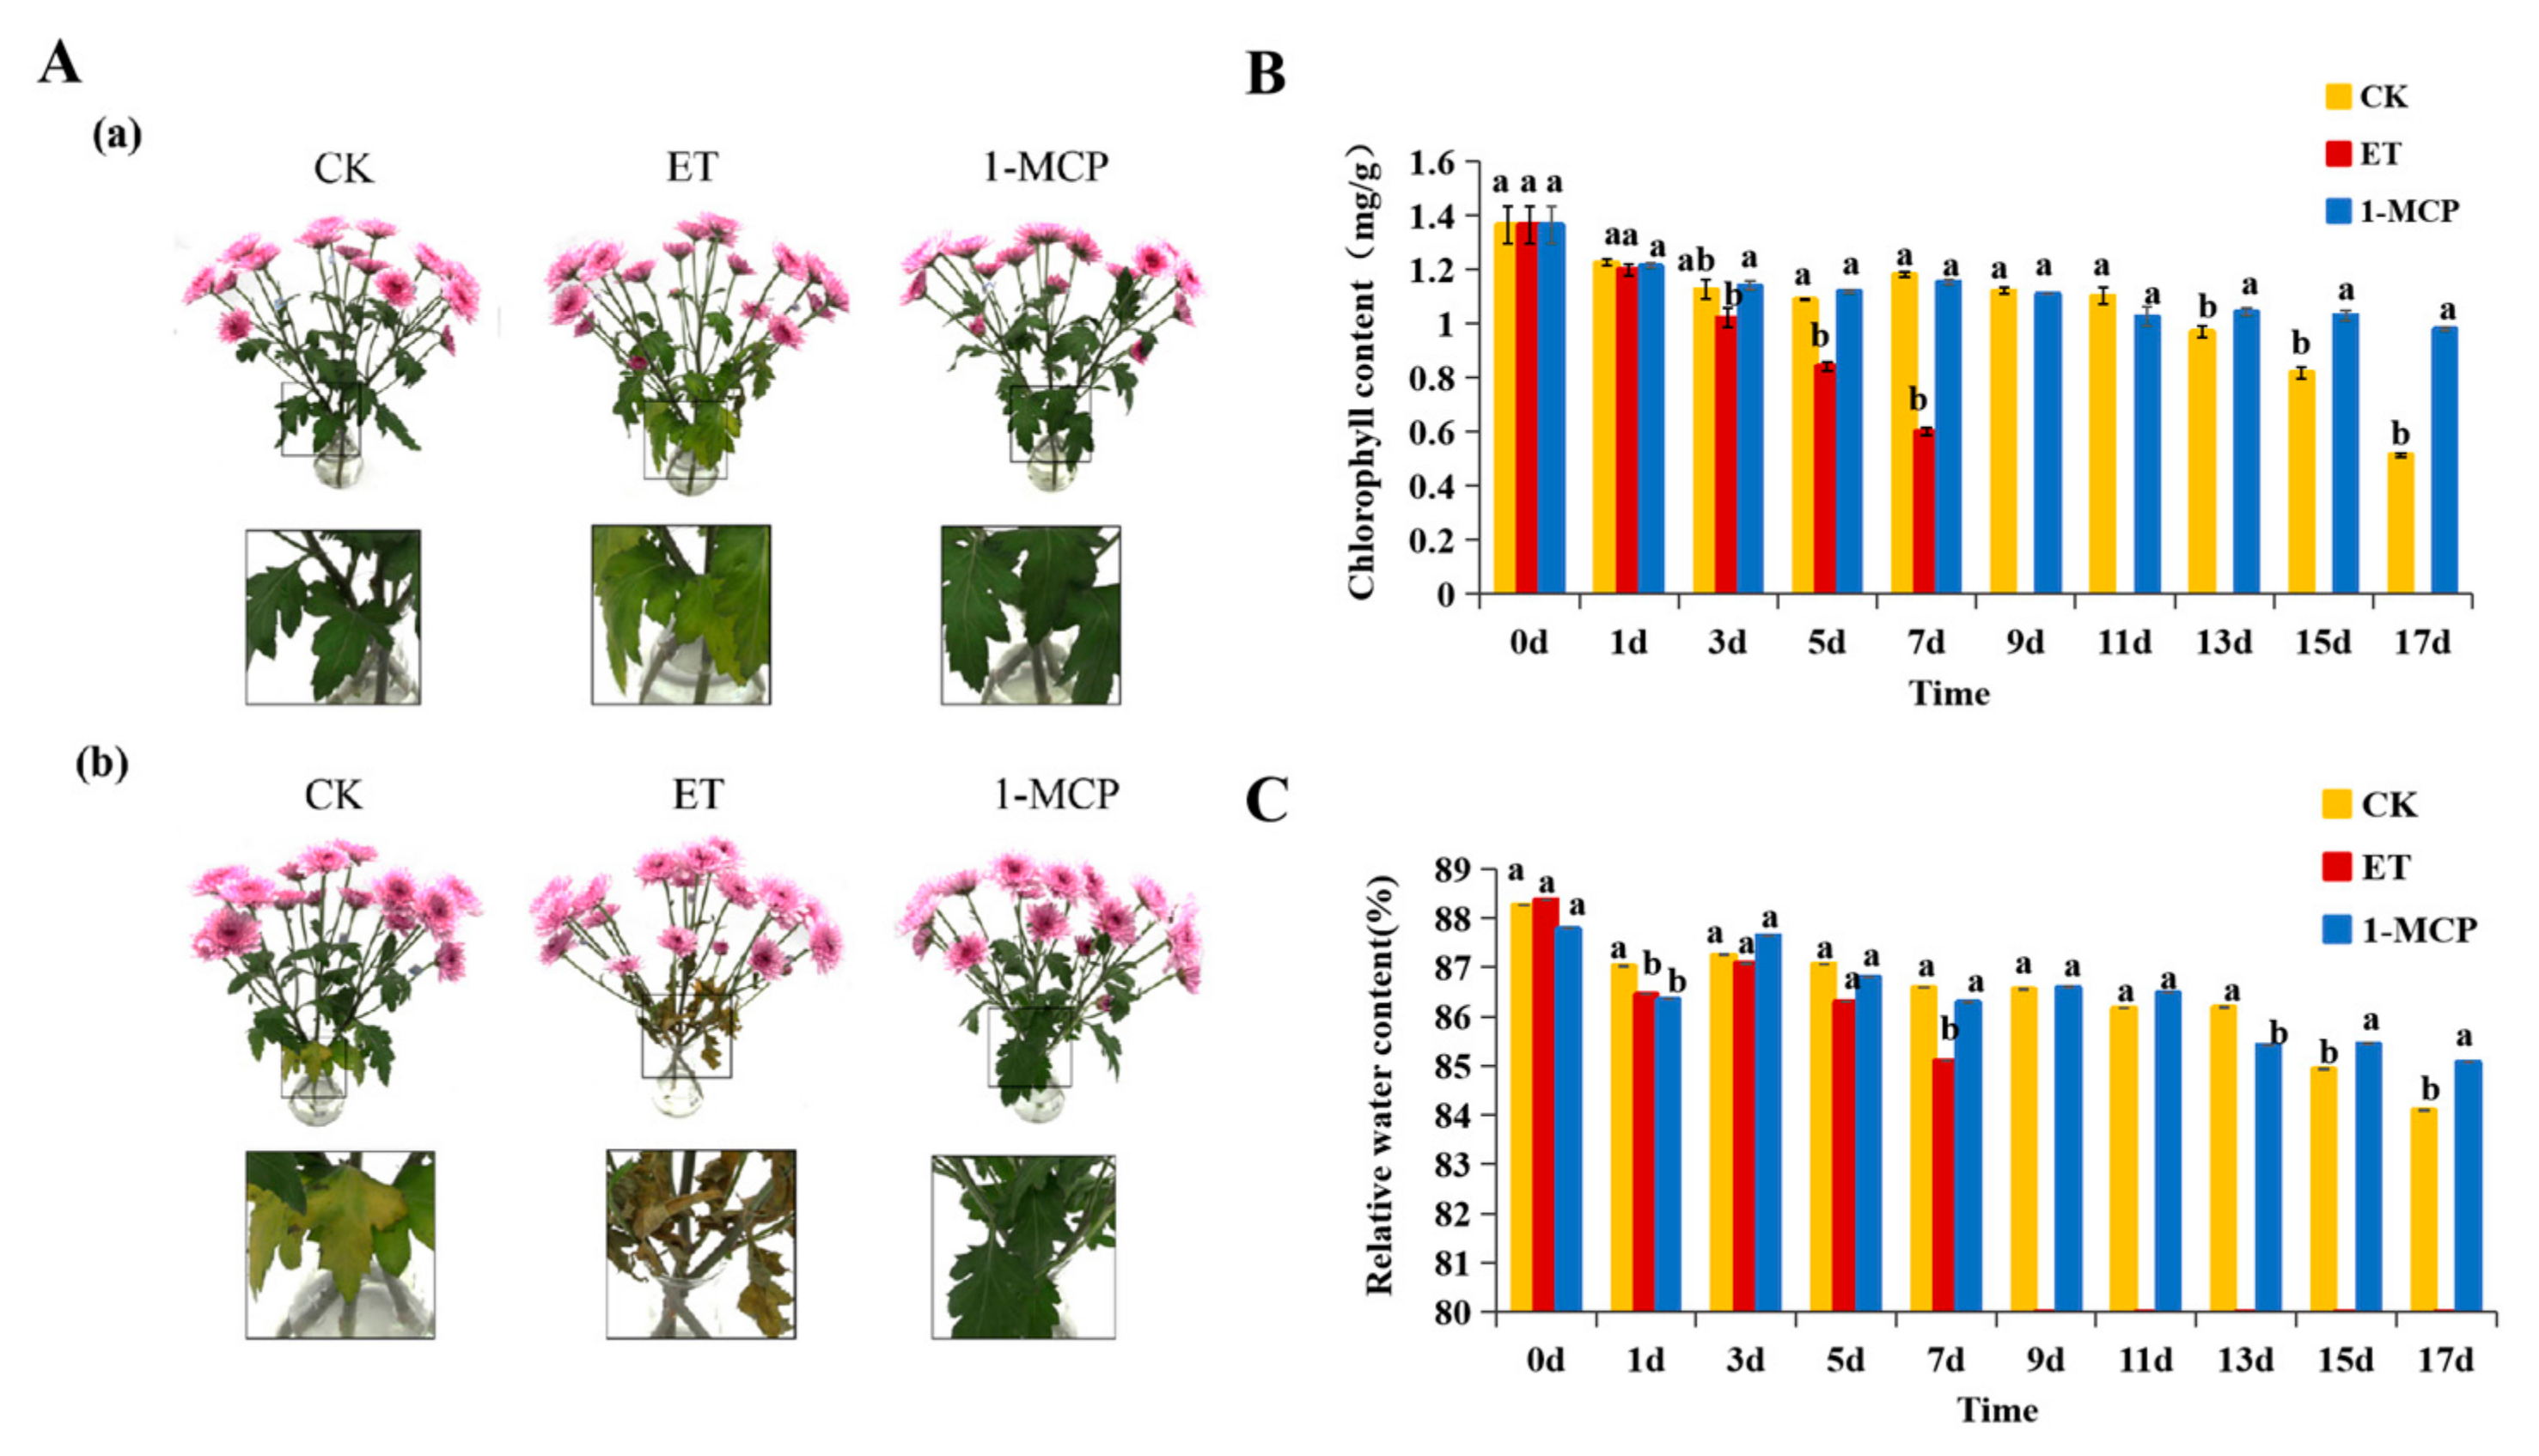 strong Figure 1/strong br/ p Phenotypic characterization of cut chrysanthem...